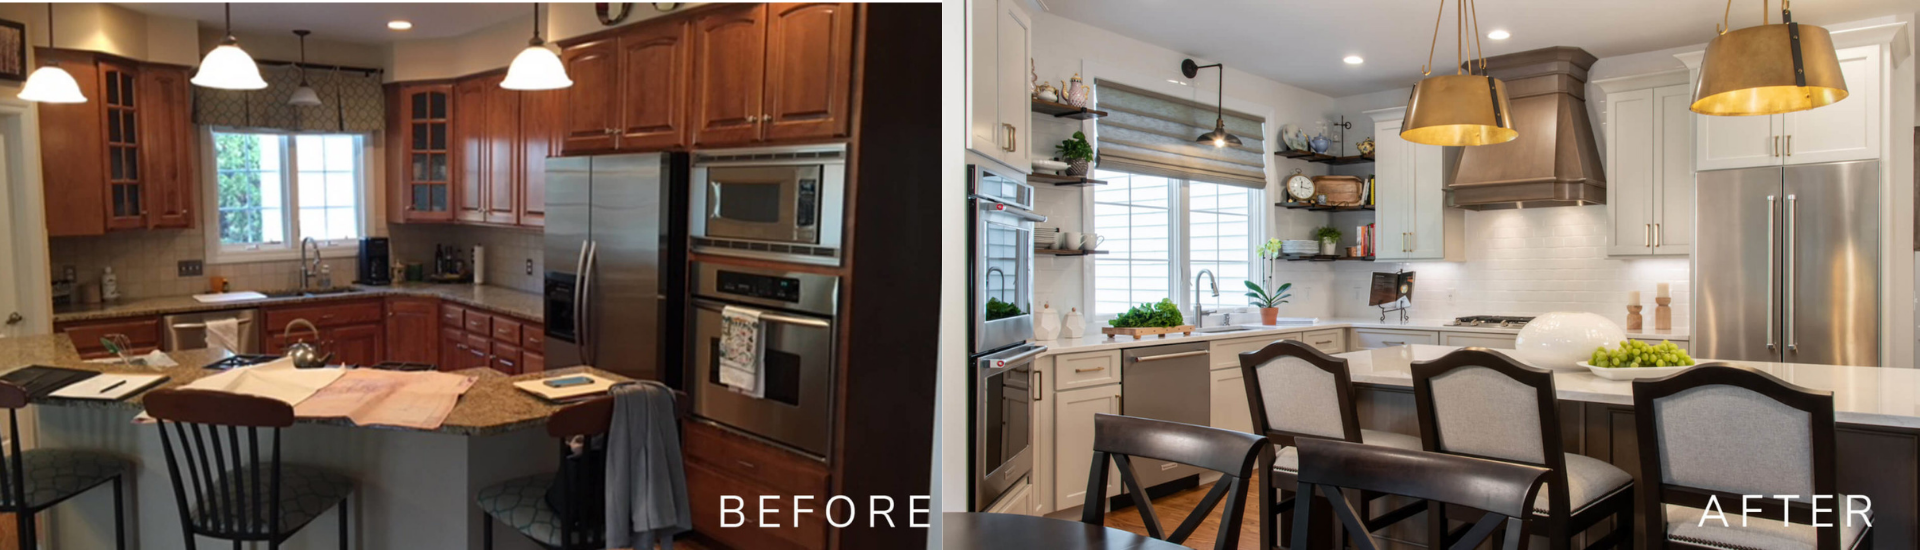 Before and after of a kitchen remodel done by Liston Design Build